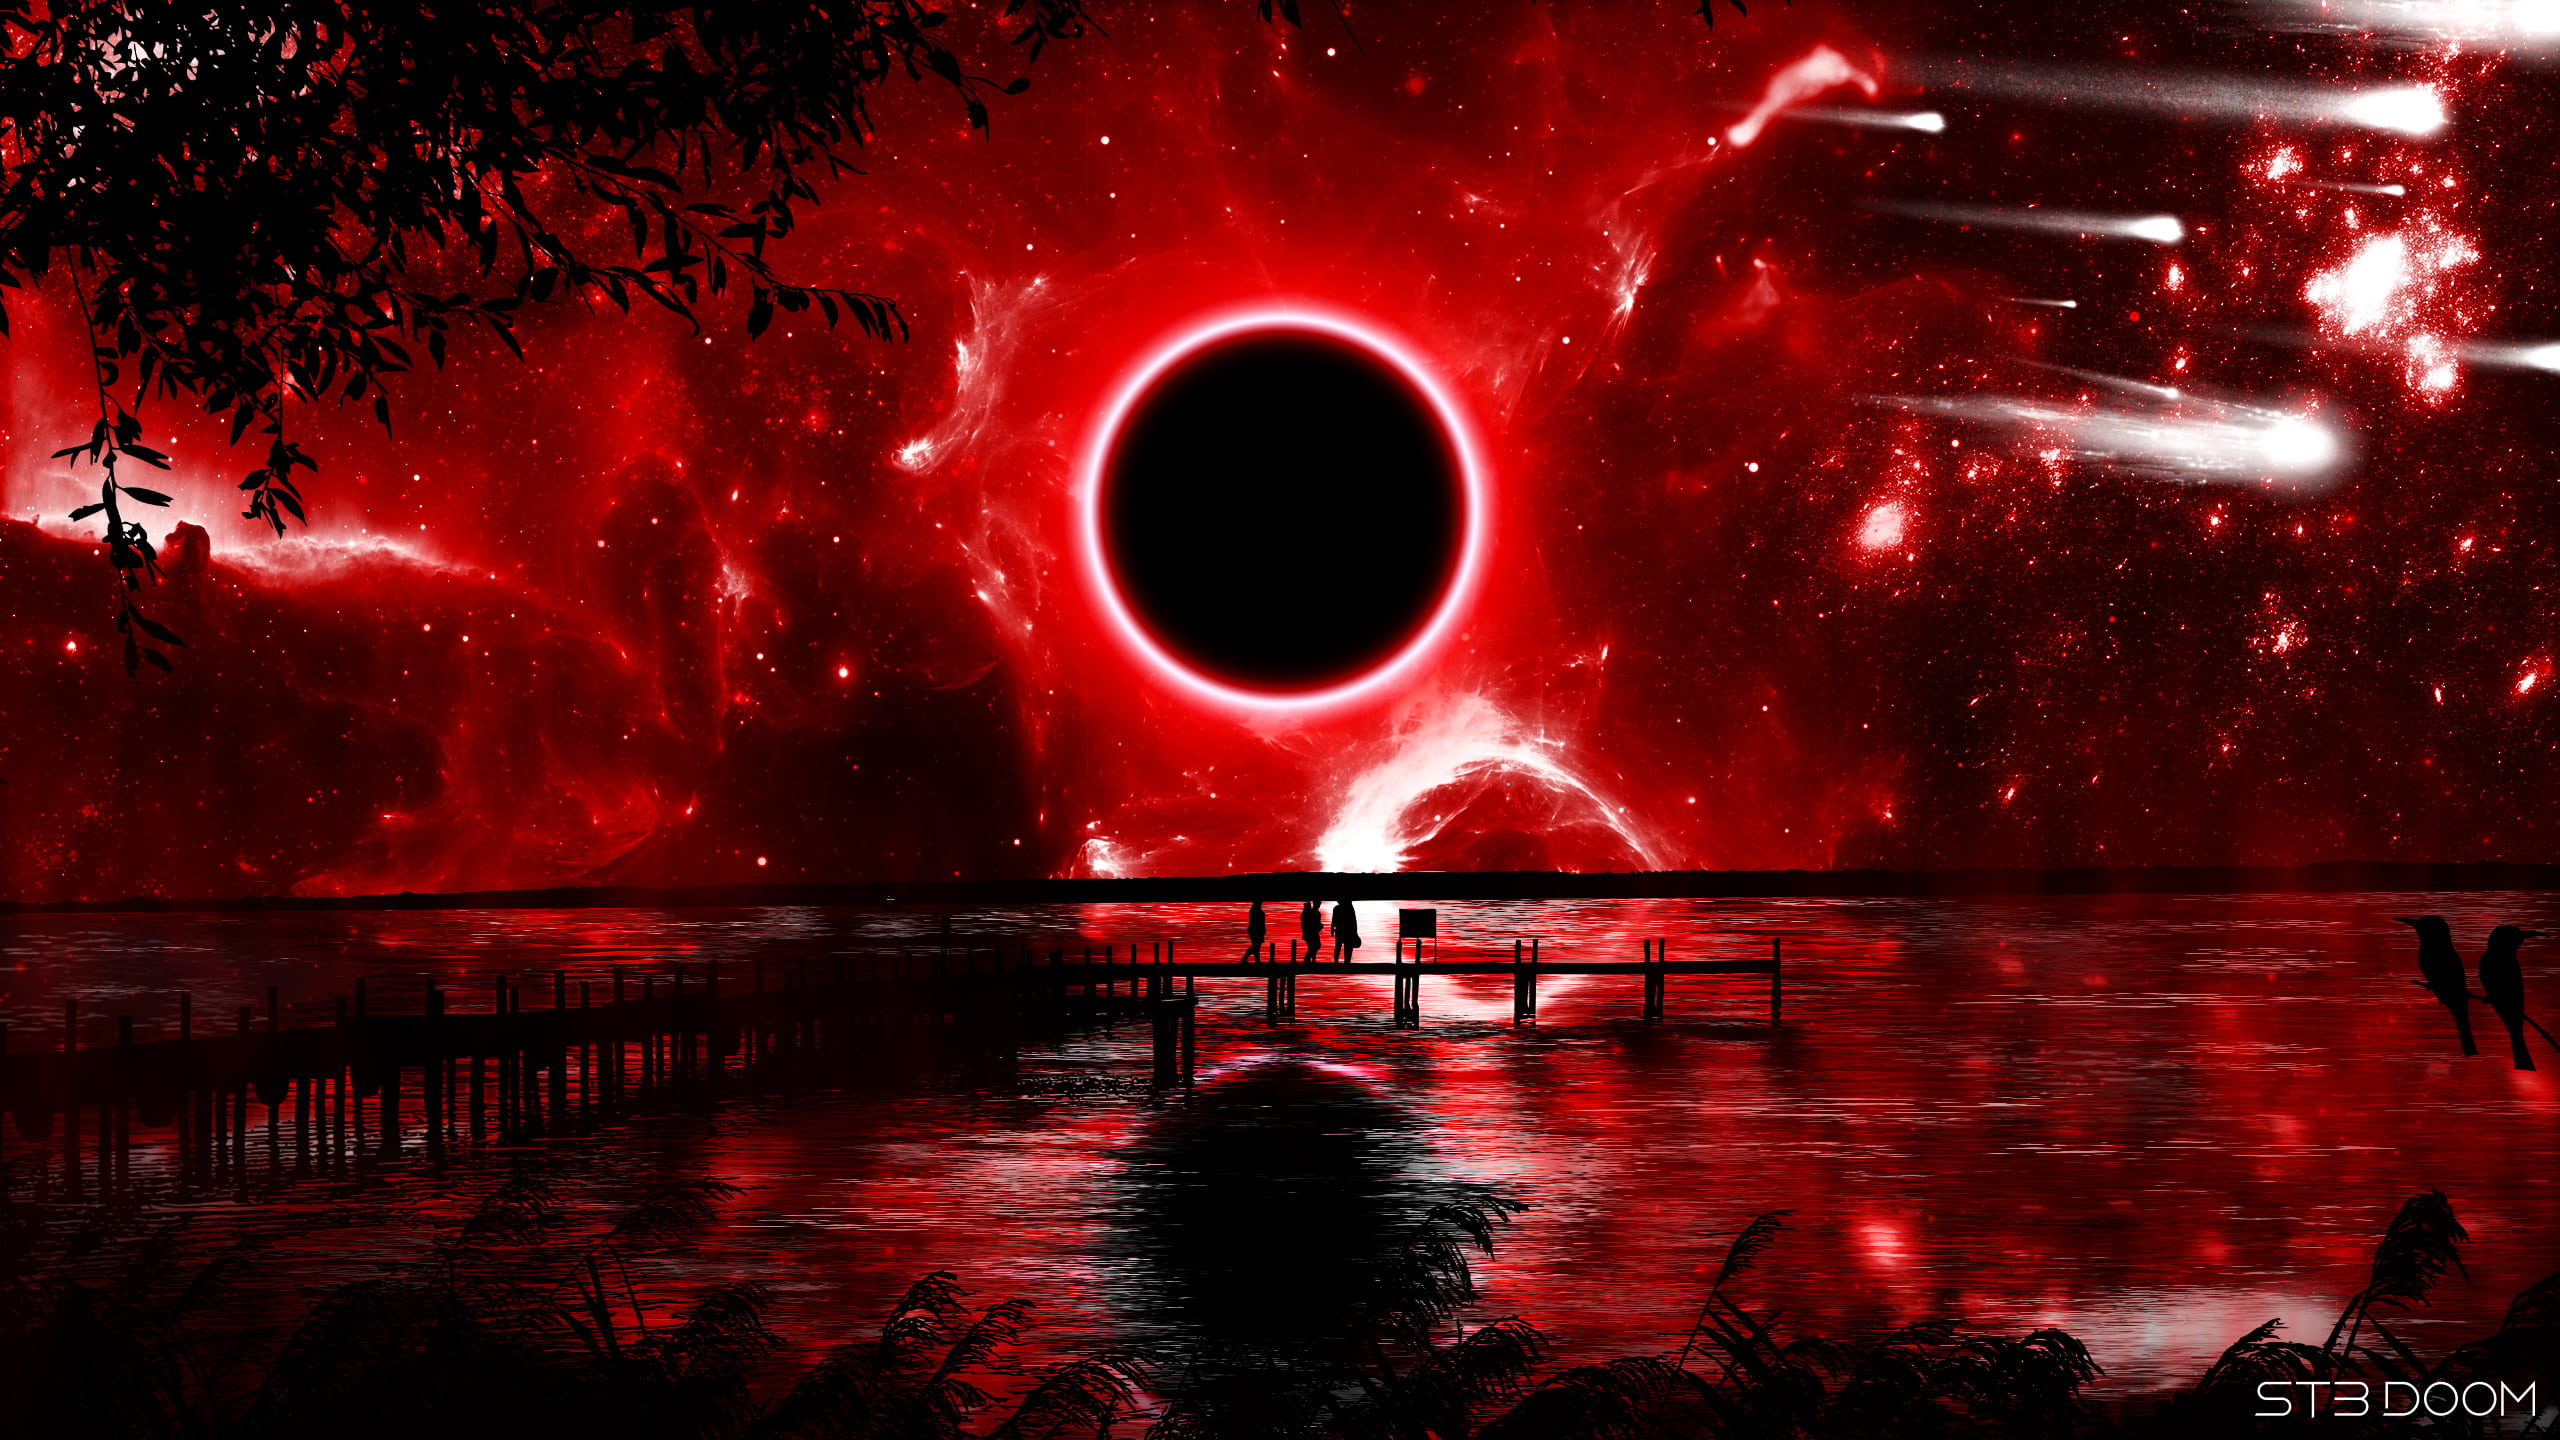 Red Black Eclipse Bridge Water Reflection Sky Trees Branch Leaves Space Stars Nebula Shooting Stars  2560x1440